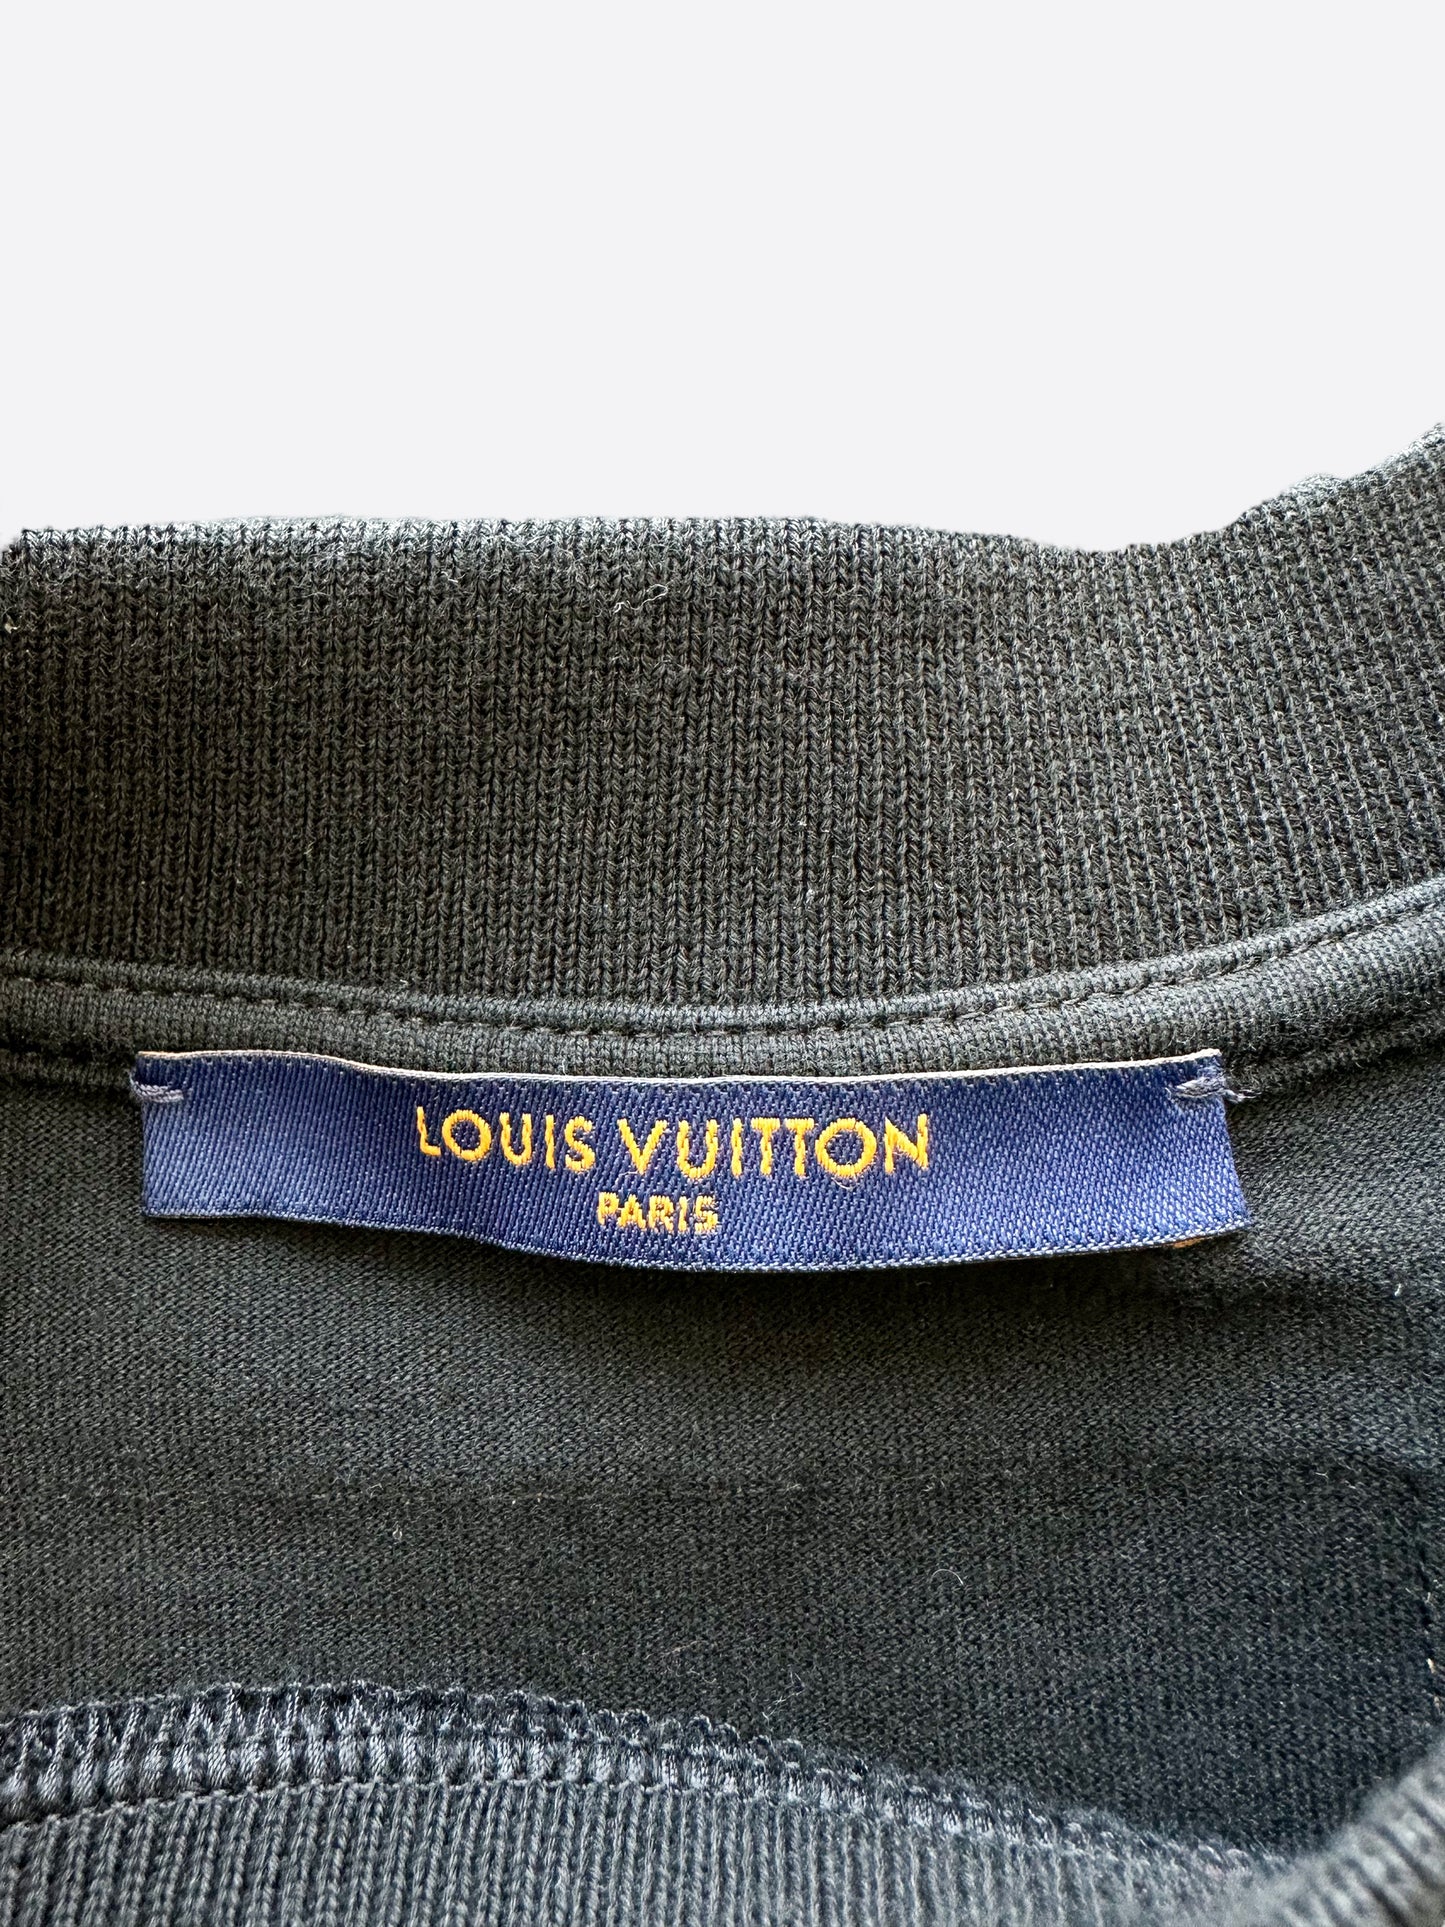 Louis Vuitton Black Trunks And Bags T-Shirt – Savonches